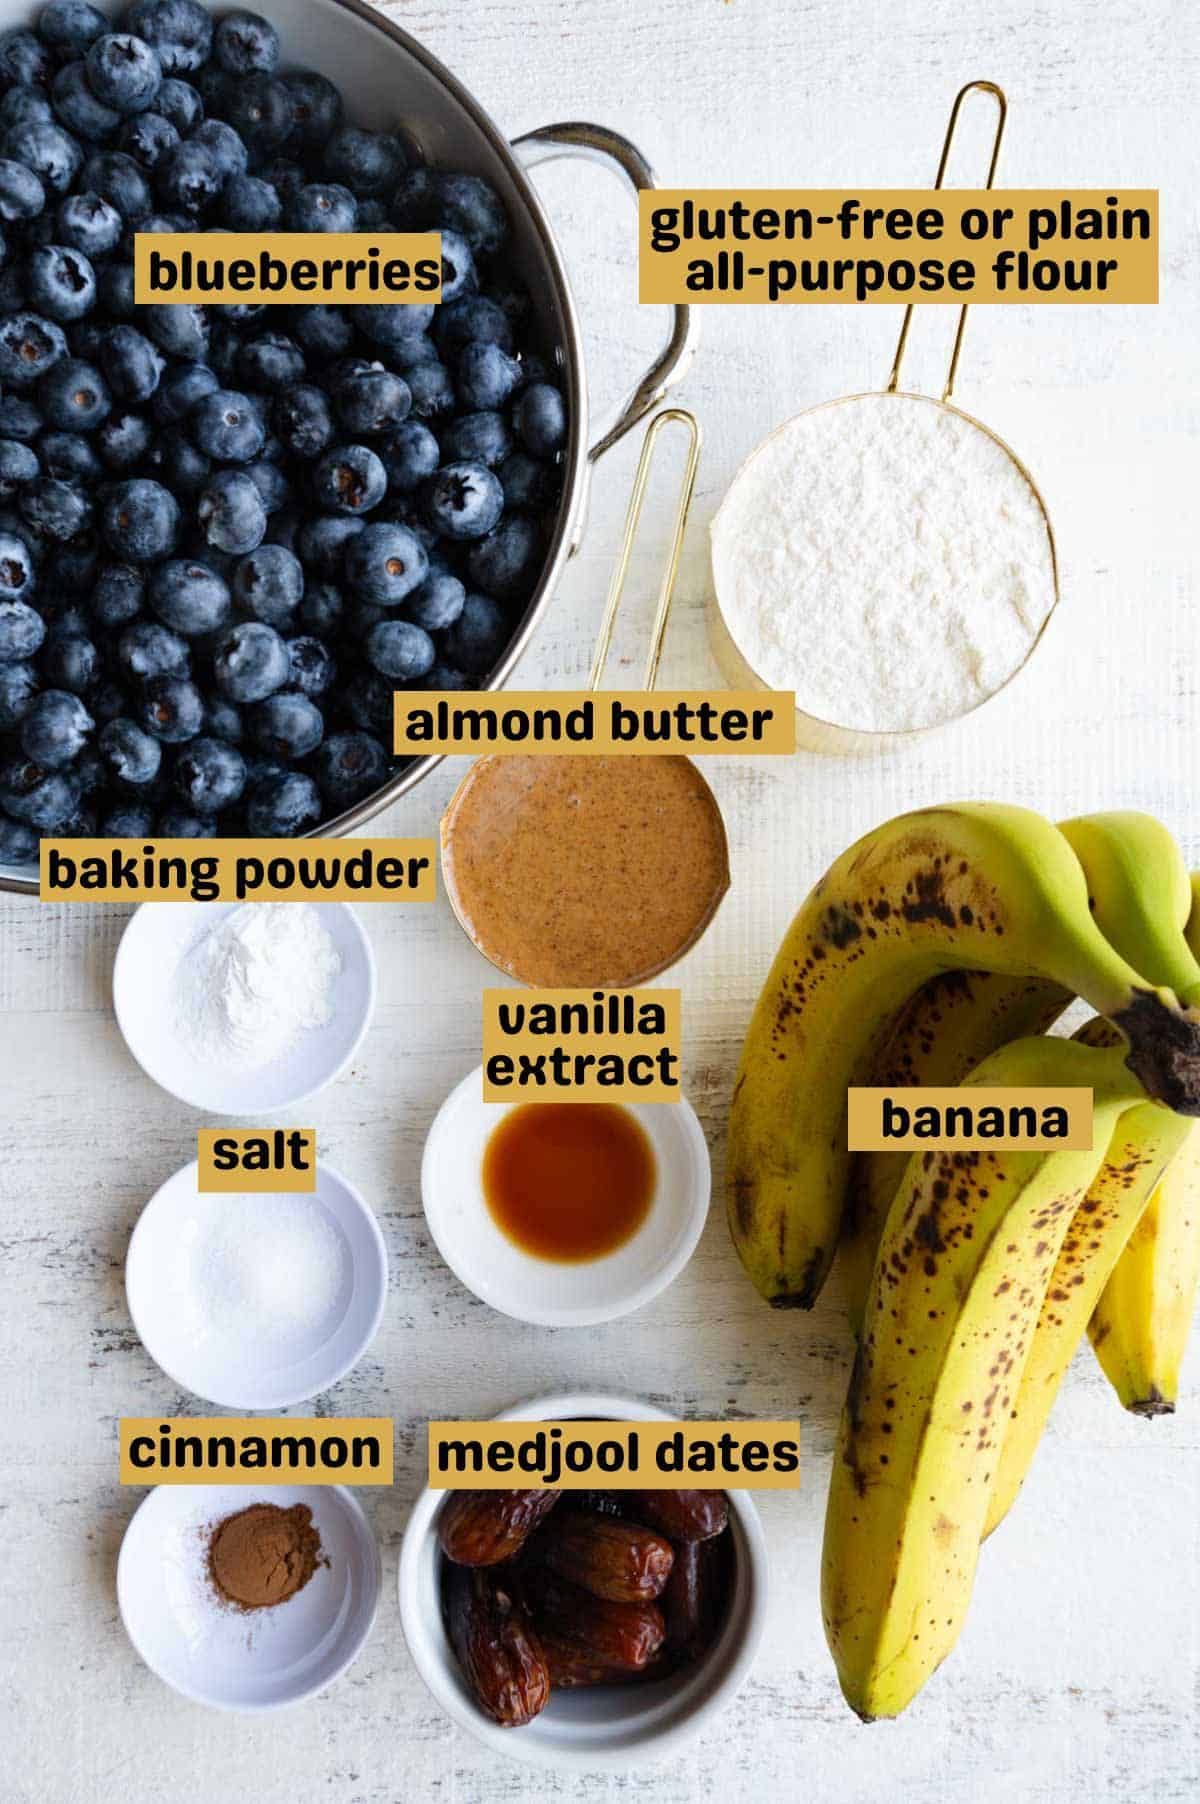 Blueberries, all-purpose flour, almond butter, maple syrup, salt, baking powder, bananas, and cinnamon in small bowls on a white backdrop.